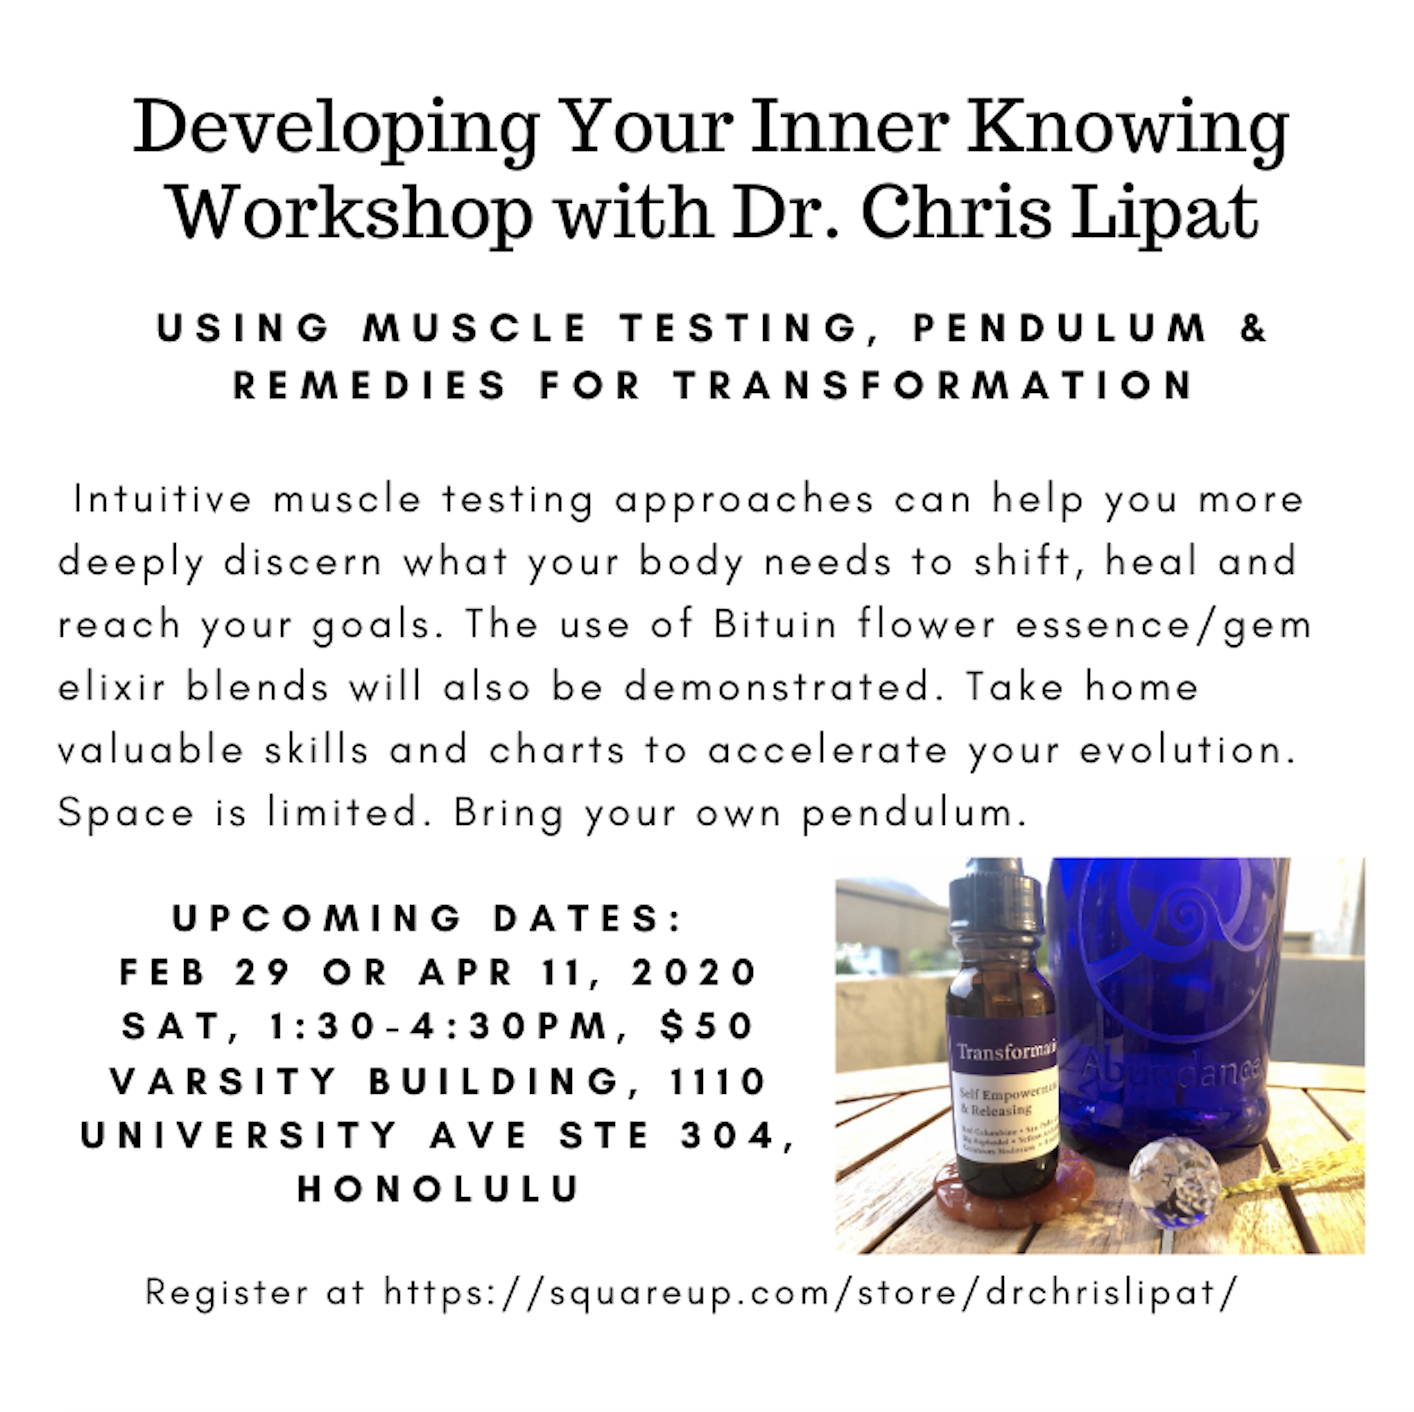 Developing Your Inner Knowing Workshop